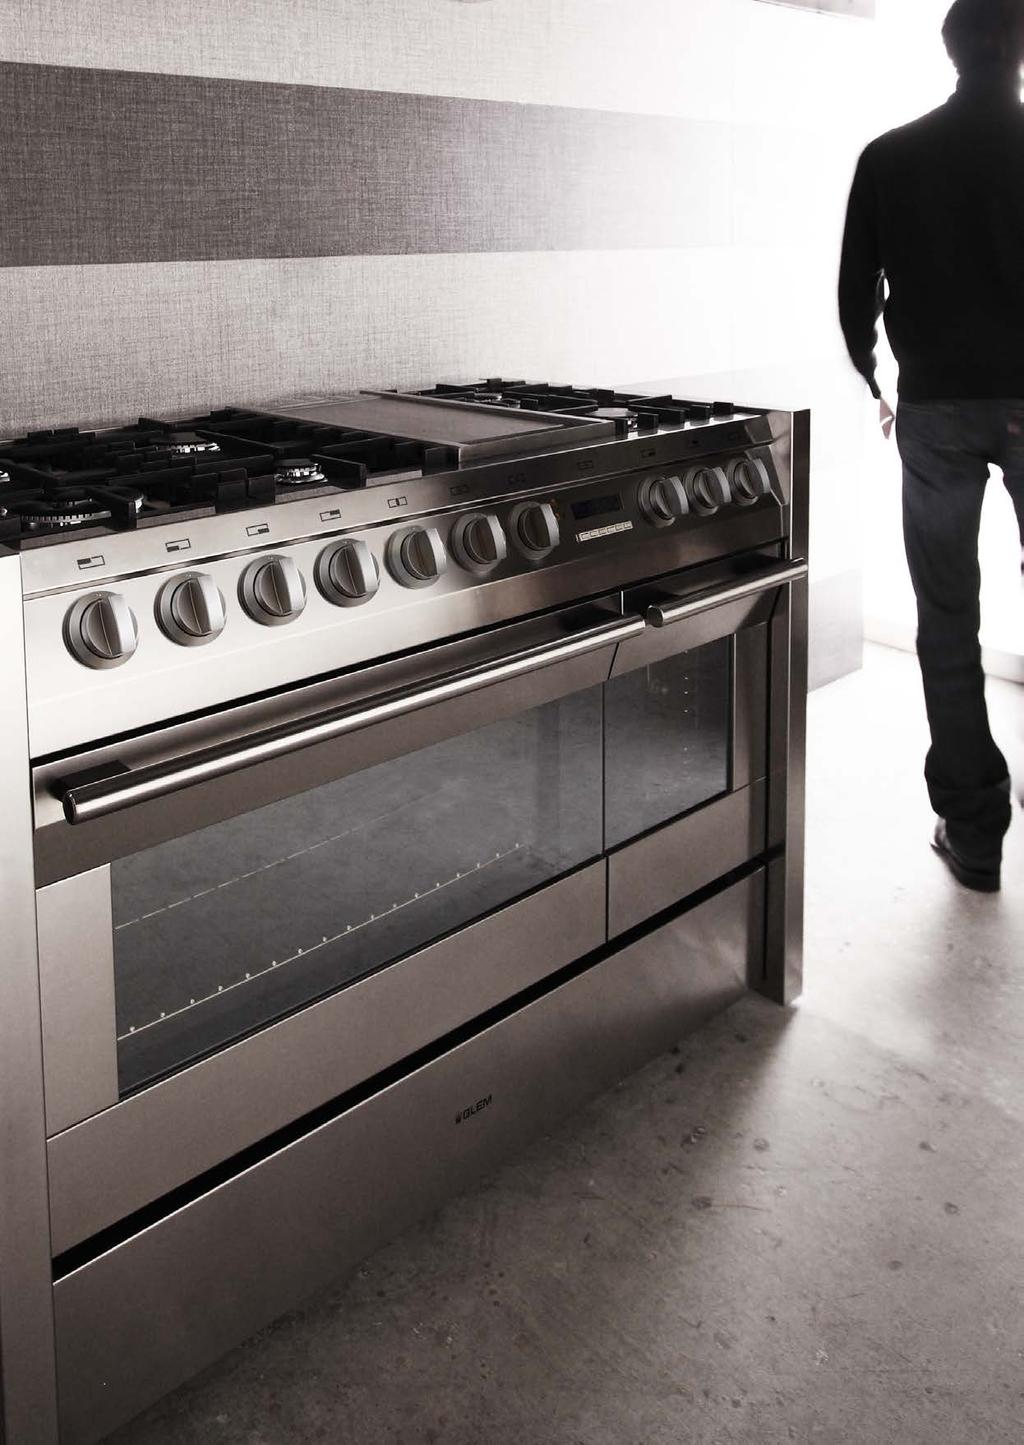 COOKERS Matrix DESIGN with CHARACTER The new design of the Matrix series, developed in conjunction with